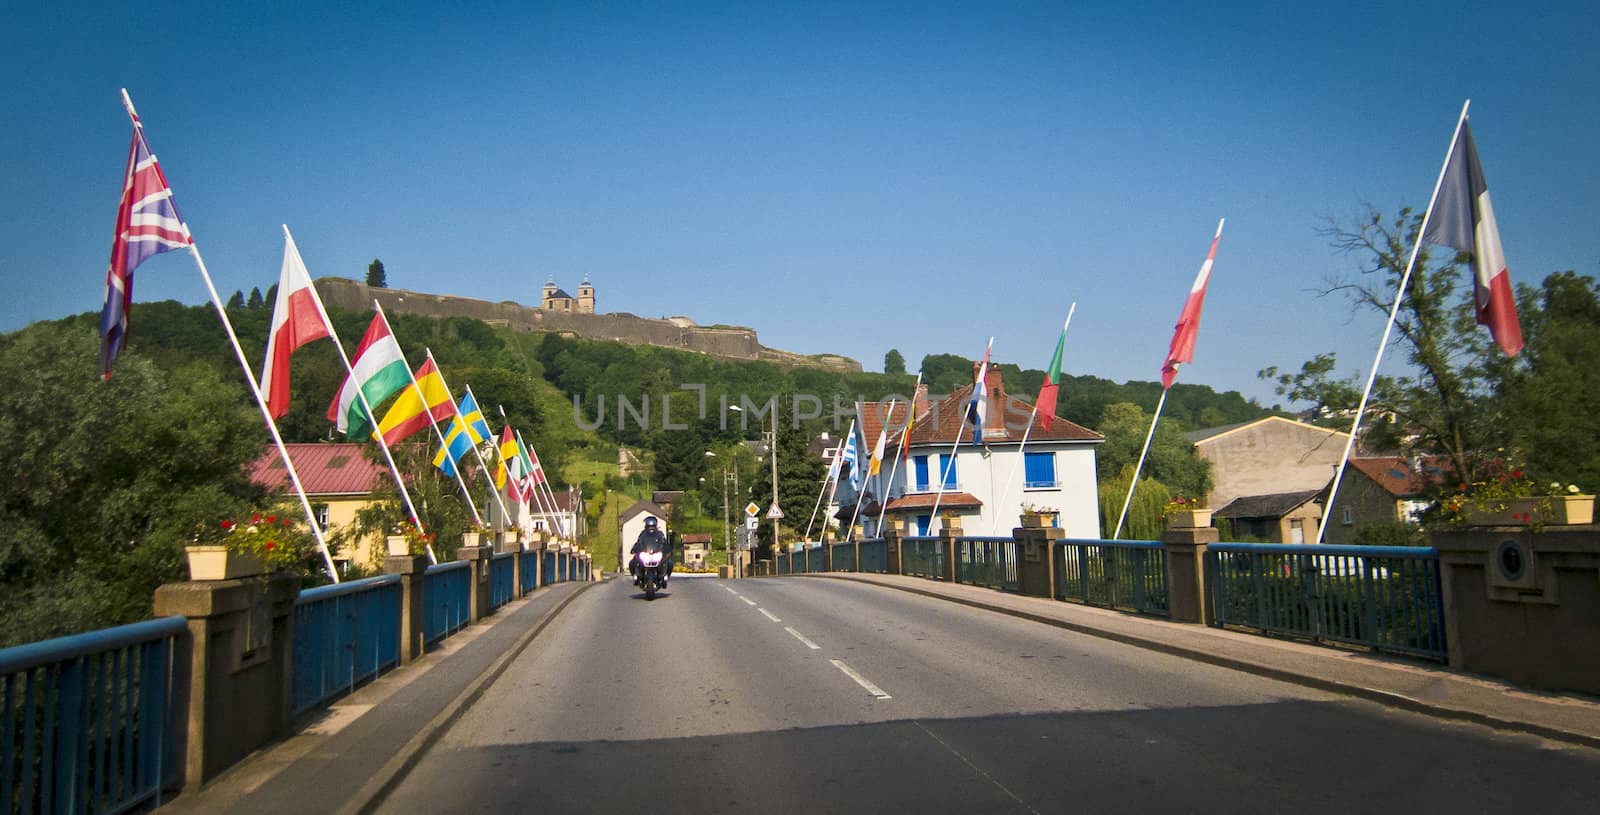 Bridge in France with european flags flying, a motorcyle approaching on bridge  and castle on the hill in the background